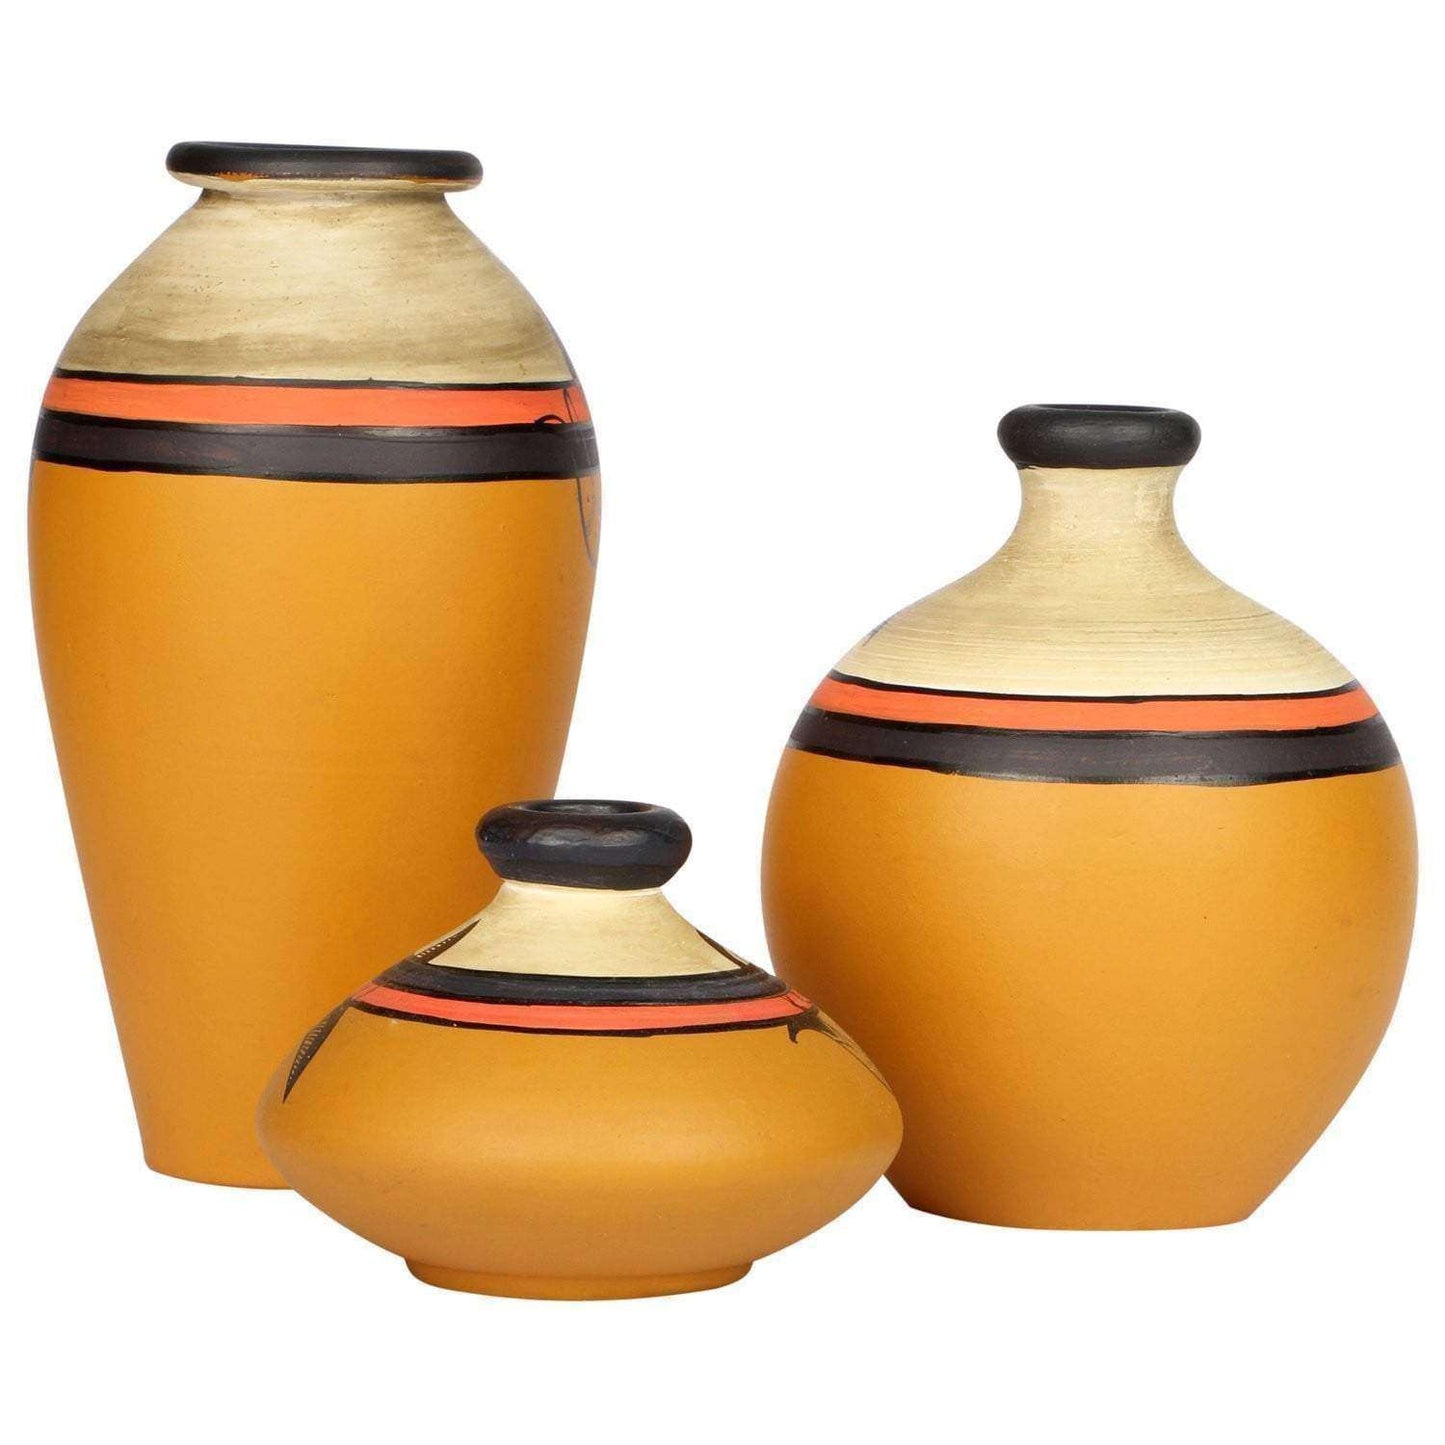 'Madhubani Creatures' Terracotta Vase In Yellow Color, Set of 3